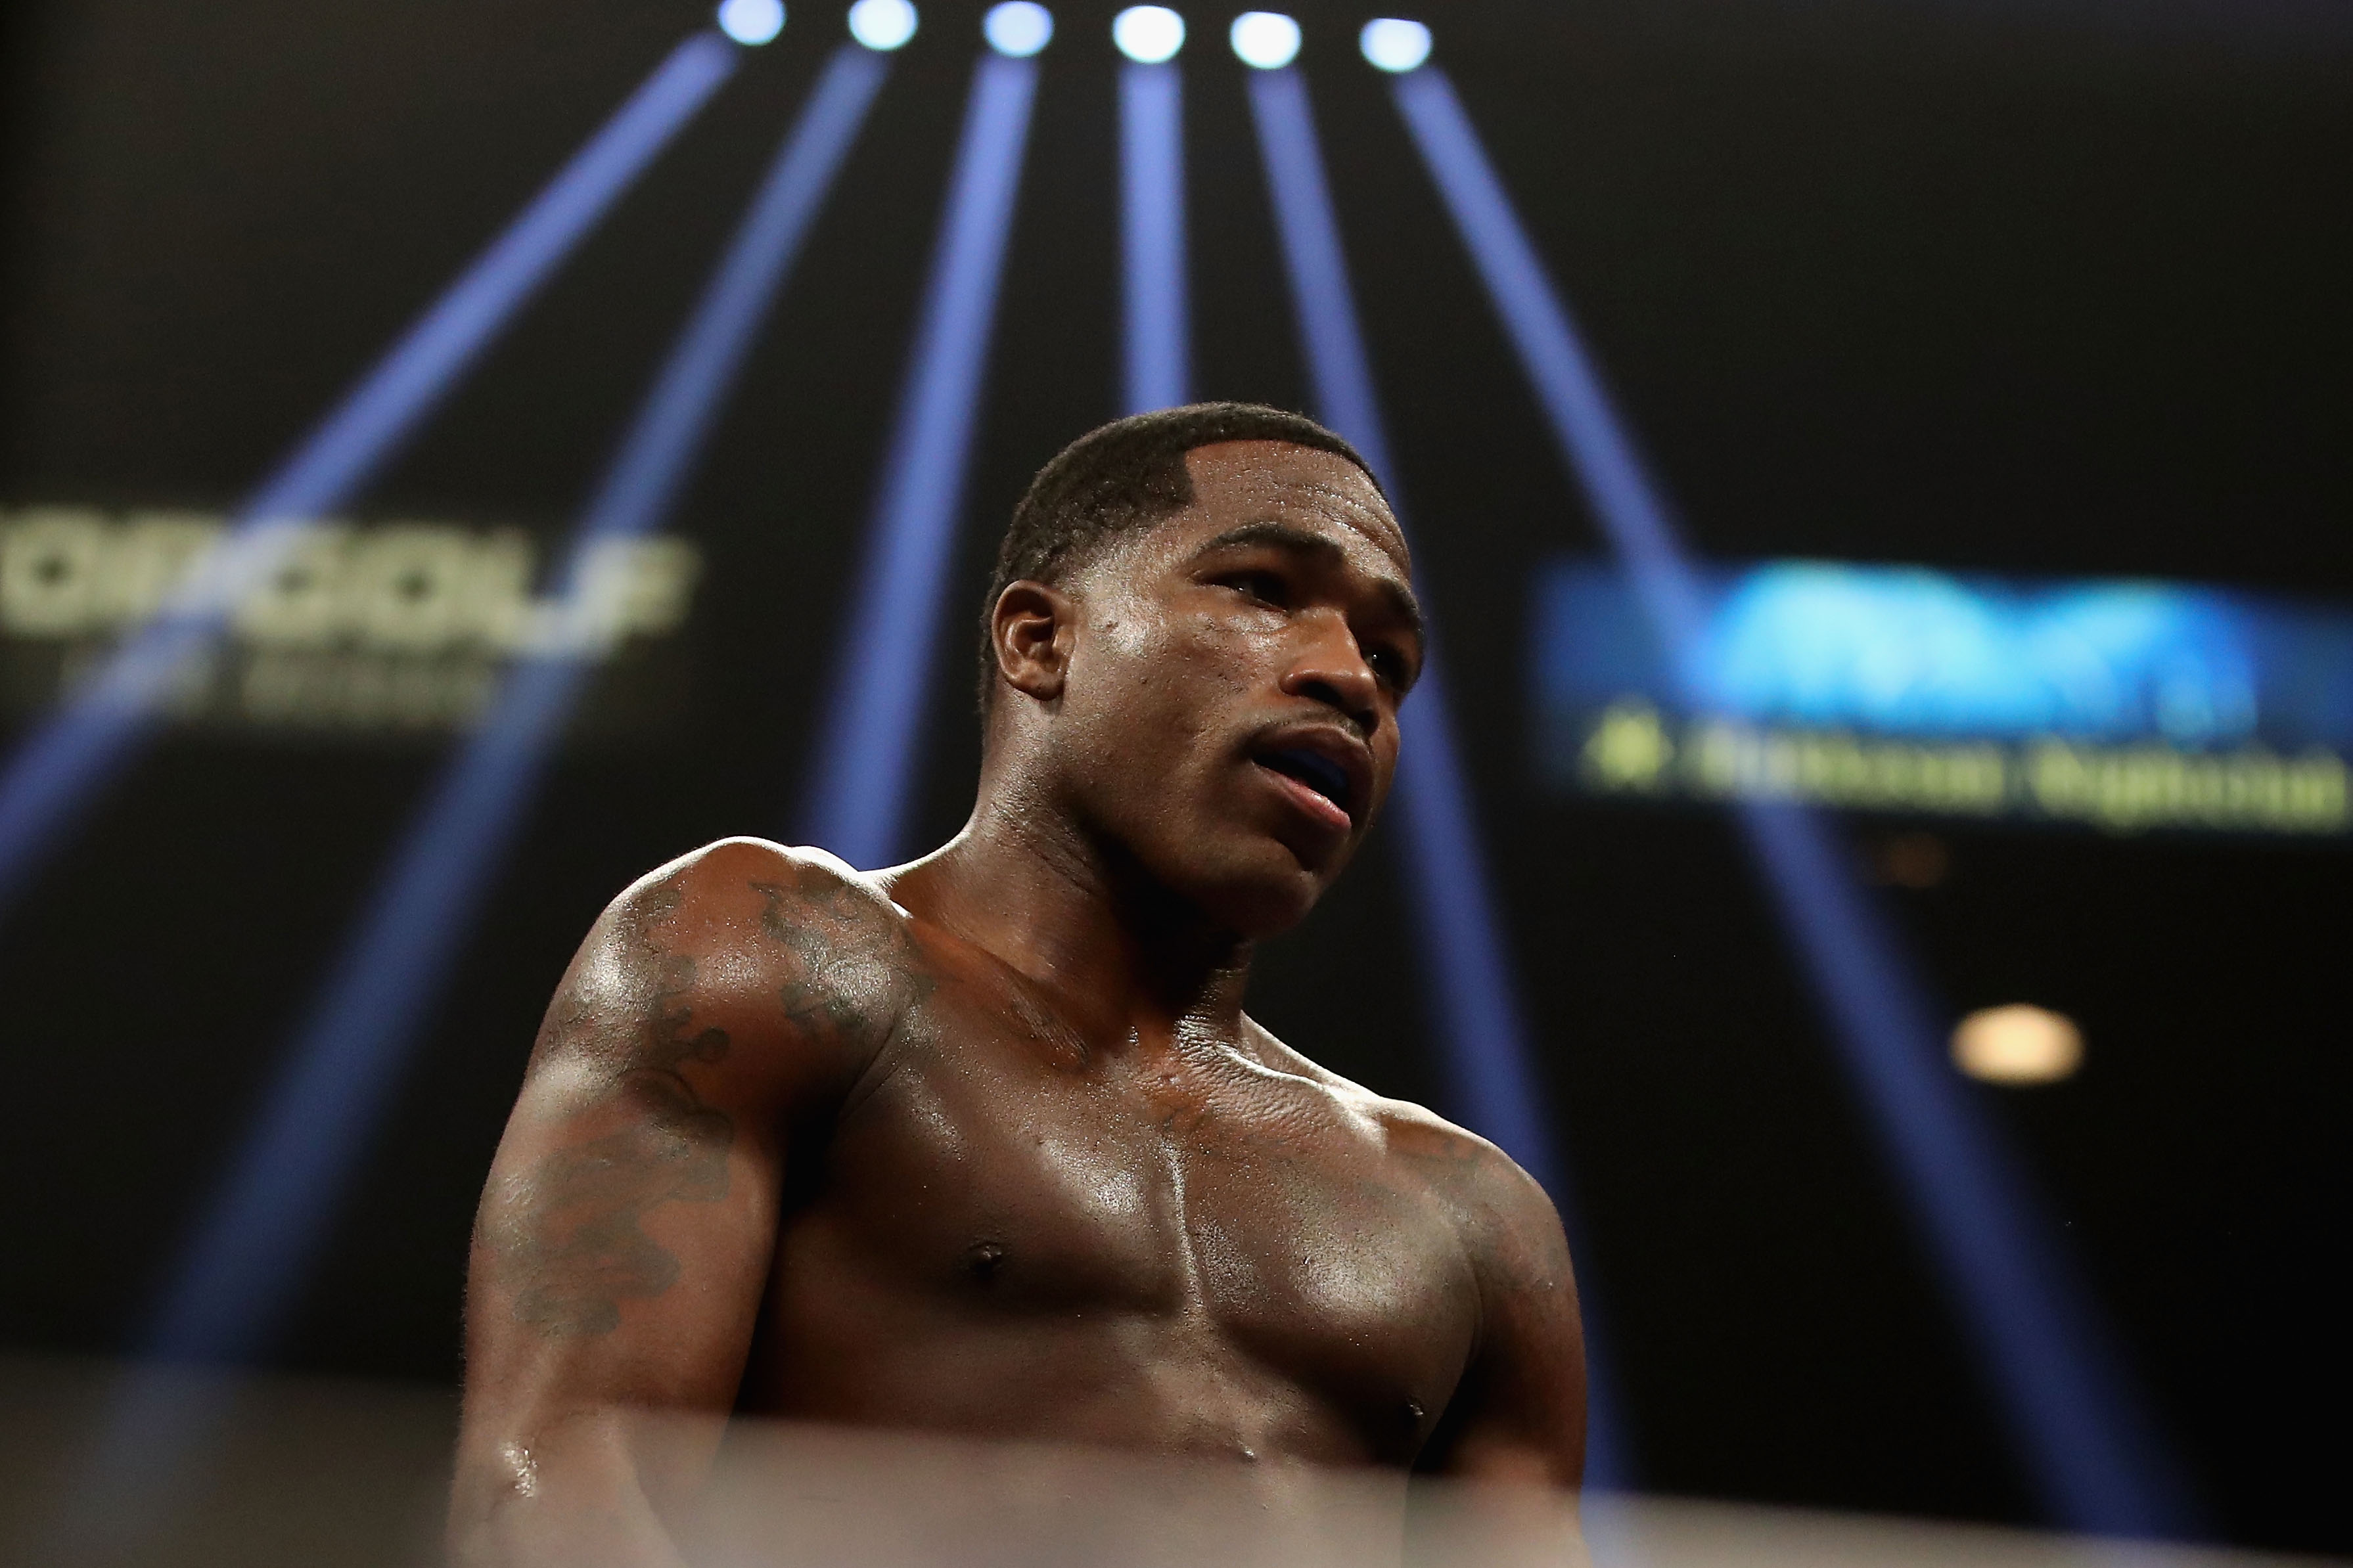 Adrien Broner says he’s took it upon himself to handle his inner demons and is awaiting a triumphant return to boxing.